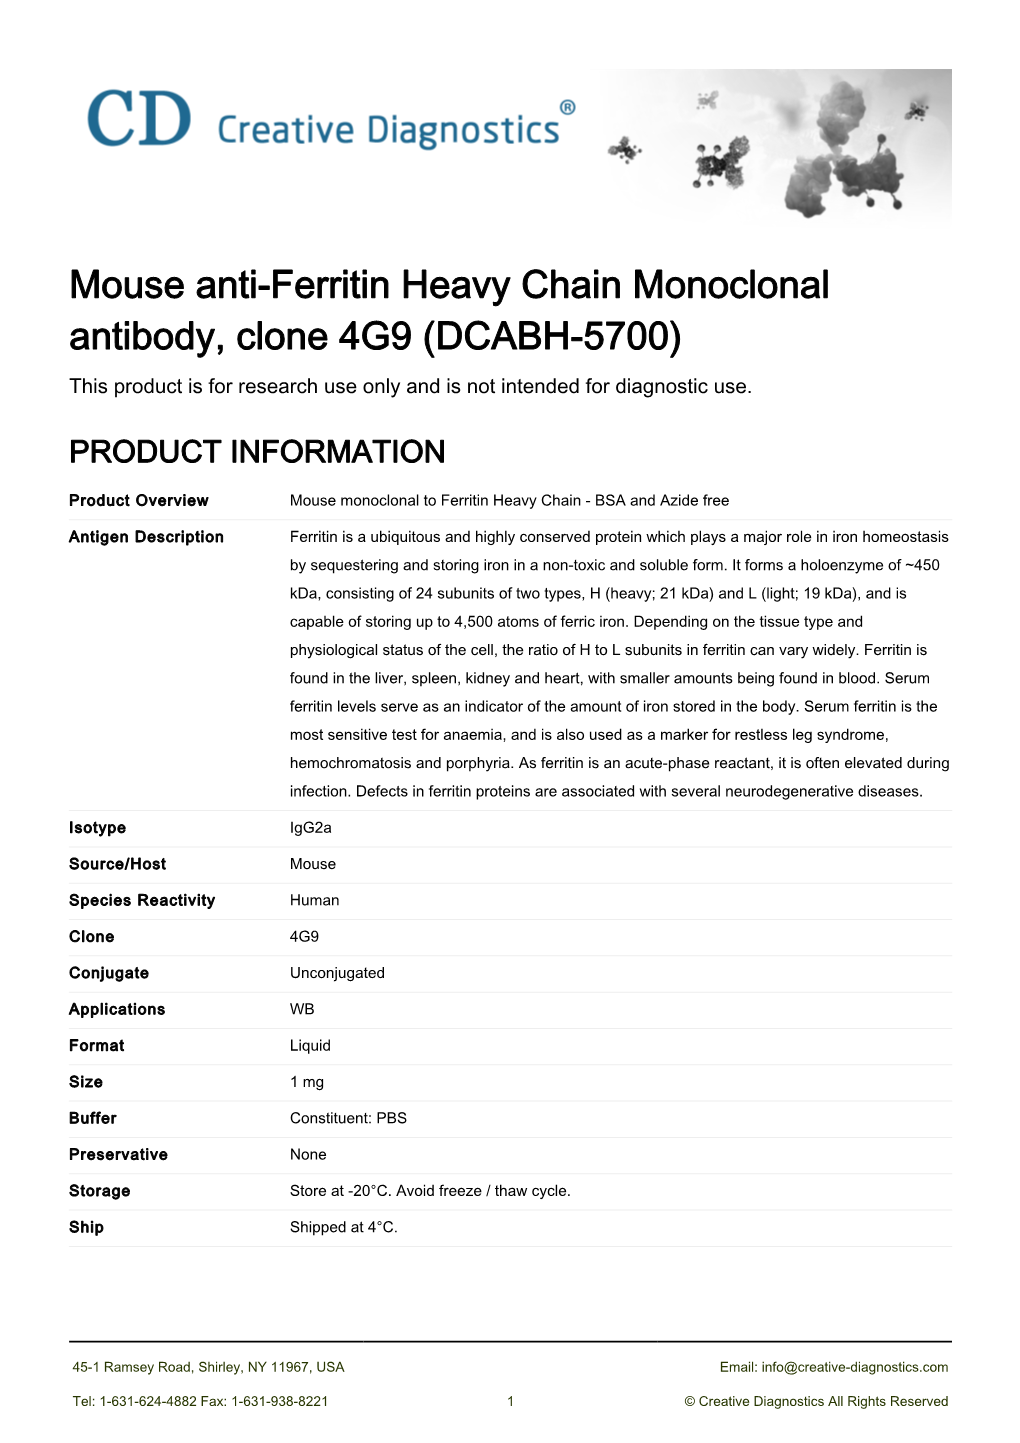 Mouse Anti-Ferritin Heavy Chain Monoclonal Antibody, Clone 4G9 (DCABH-5700) This Product Is for Research Use Only and Is Not Intended for Diagnostic Use